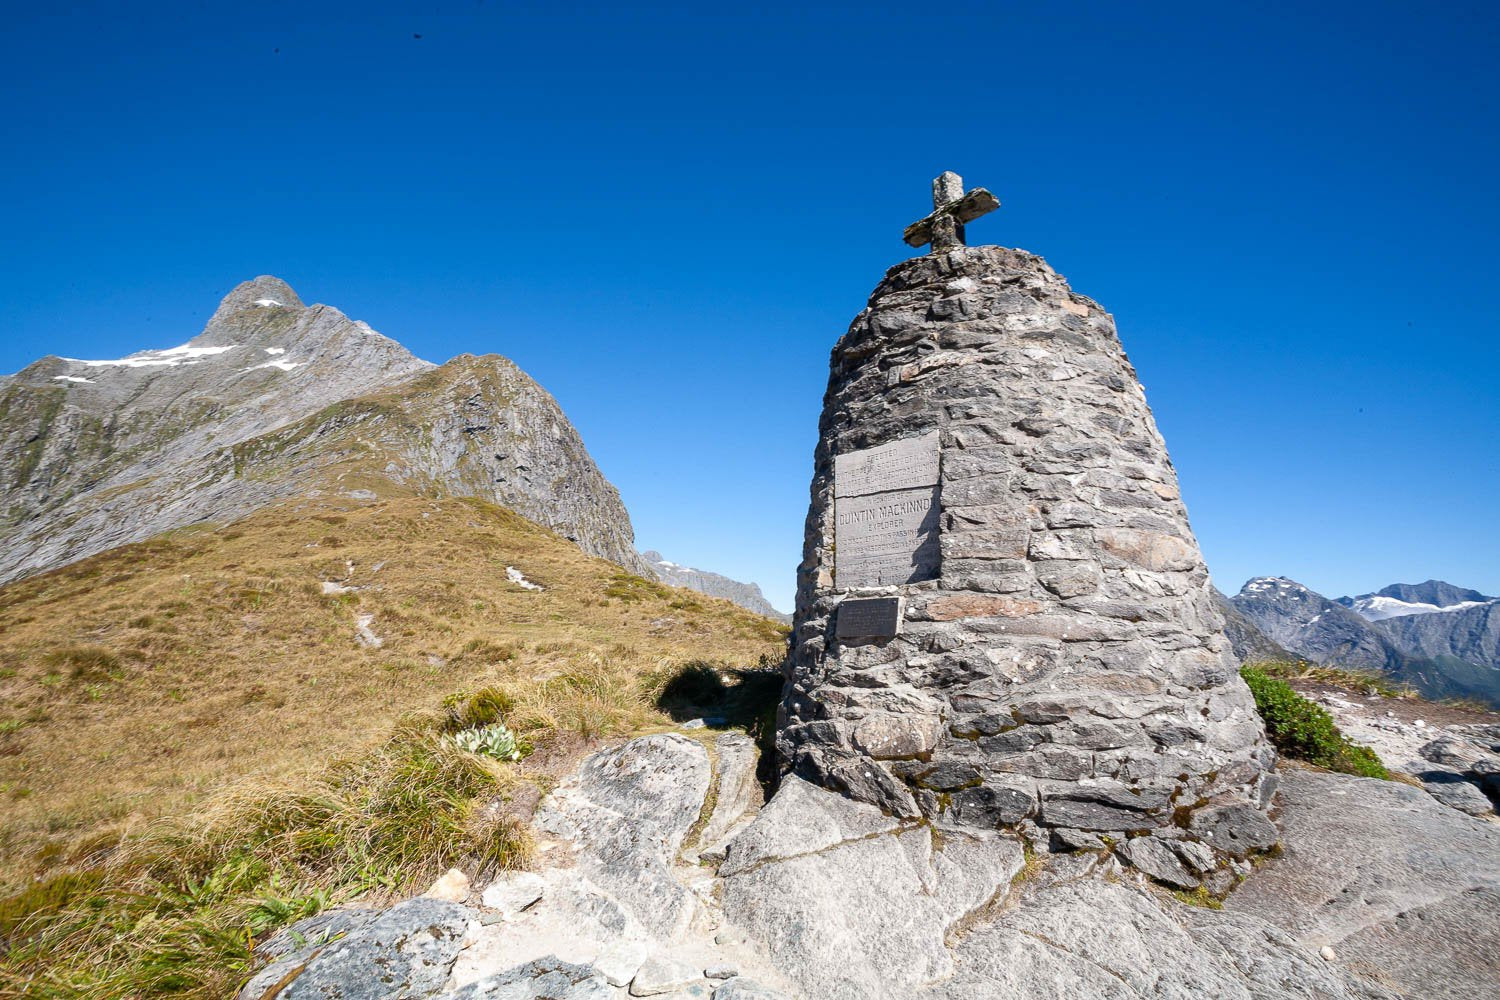 A standing stone with a plus sign on it in a greeny hill area, MacKinnon Pass Monument, Milford Track - New Zealand 